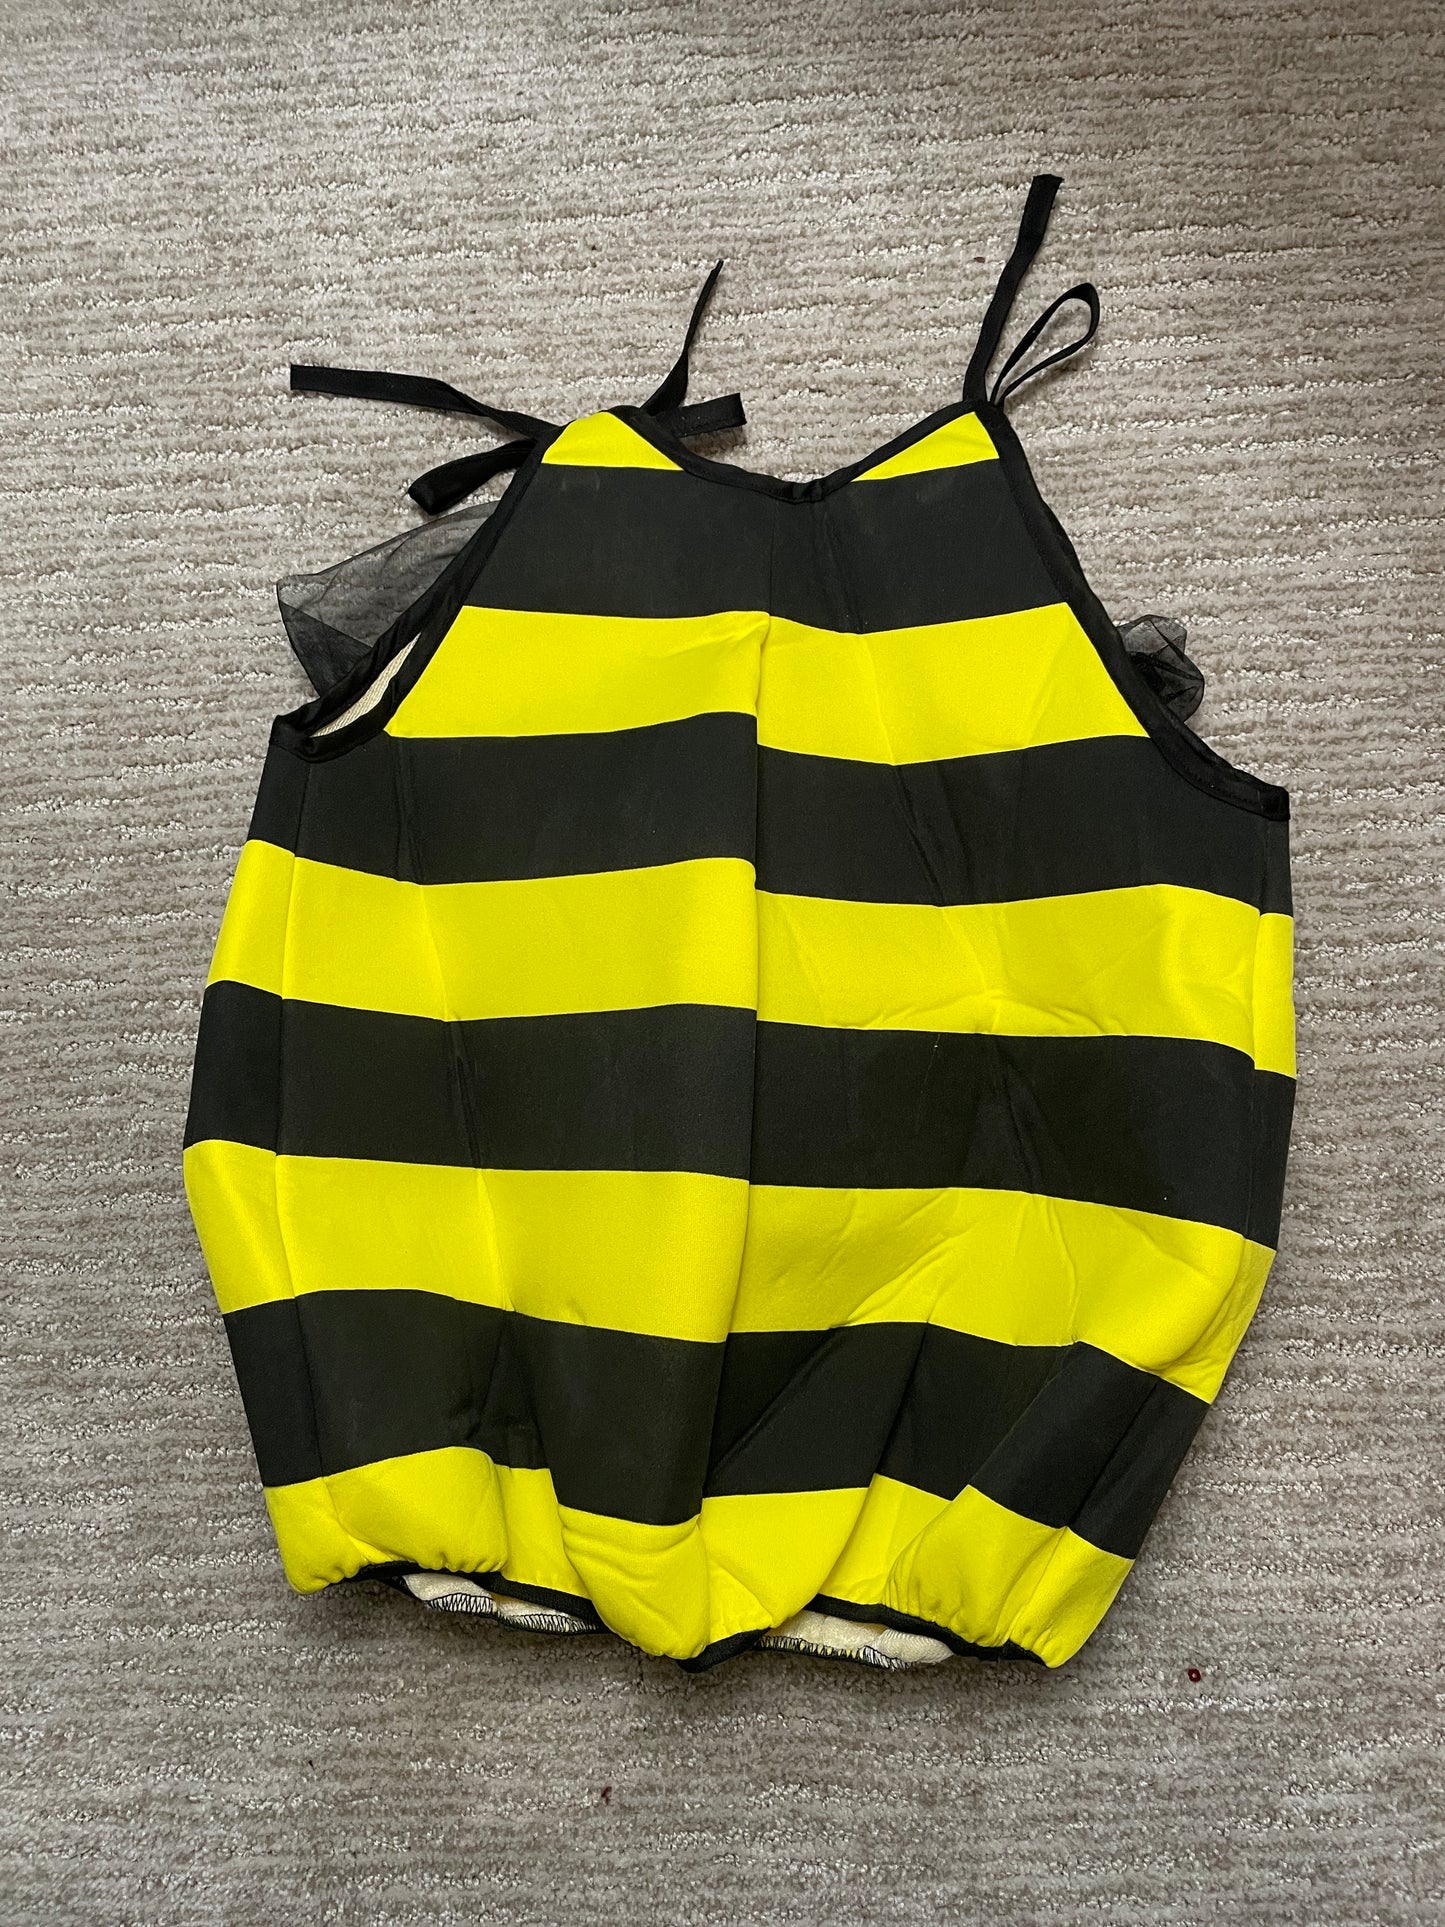 Bumblebee for Toddlers